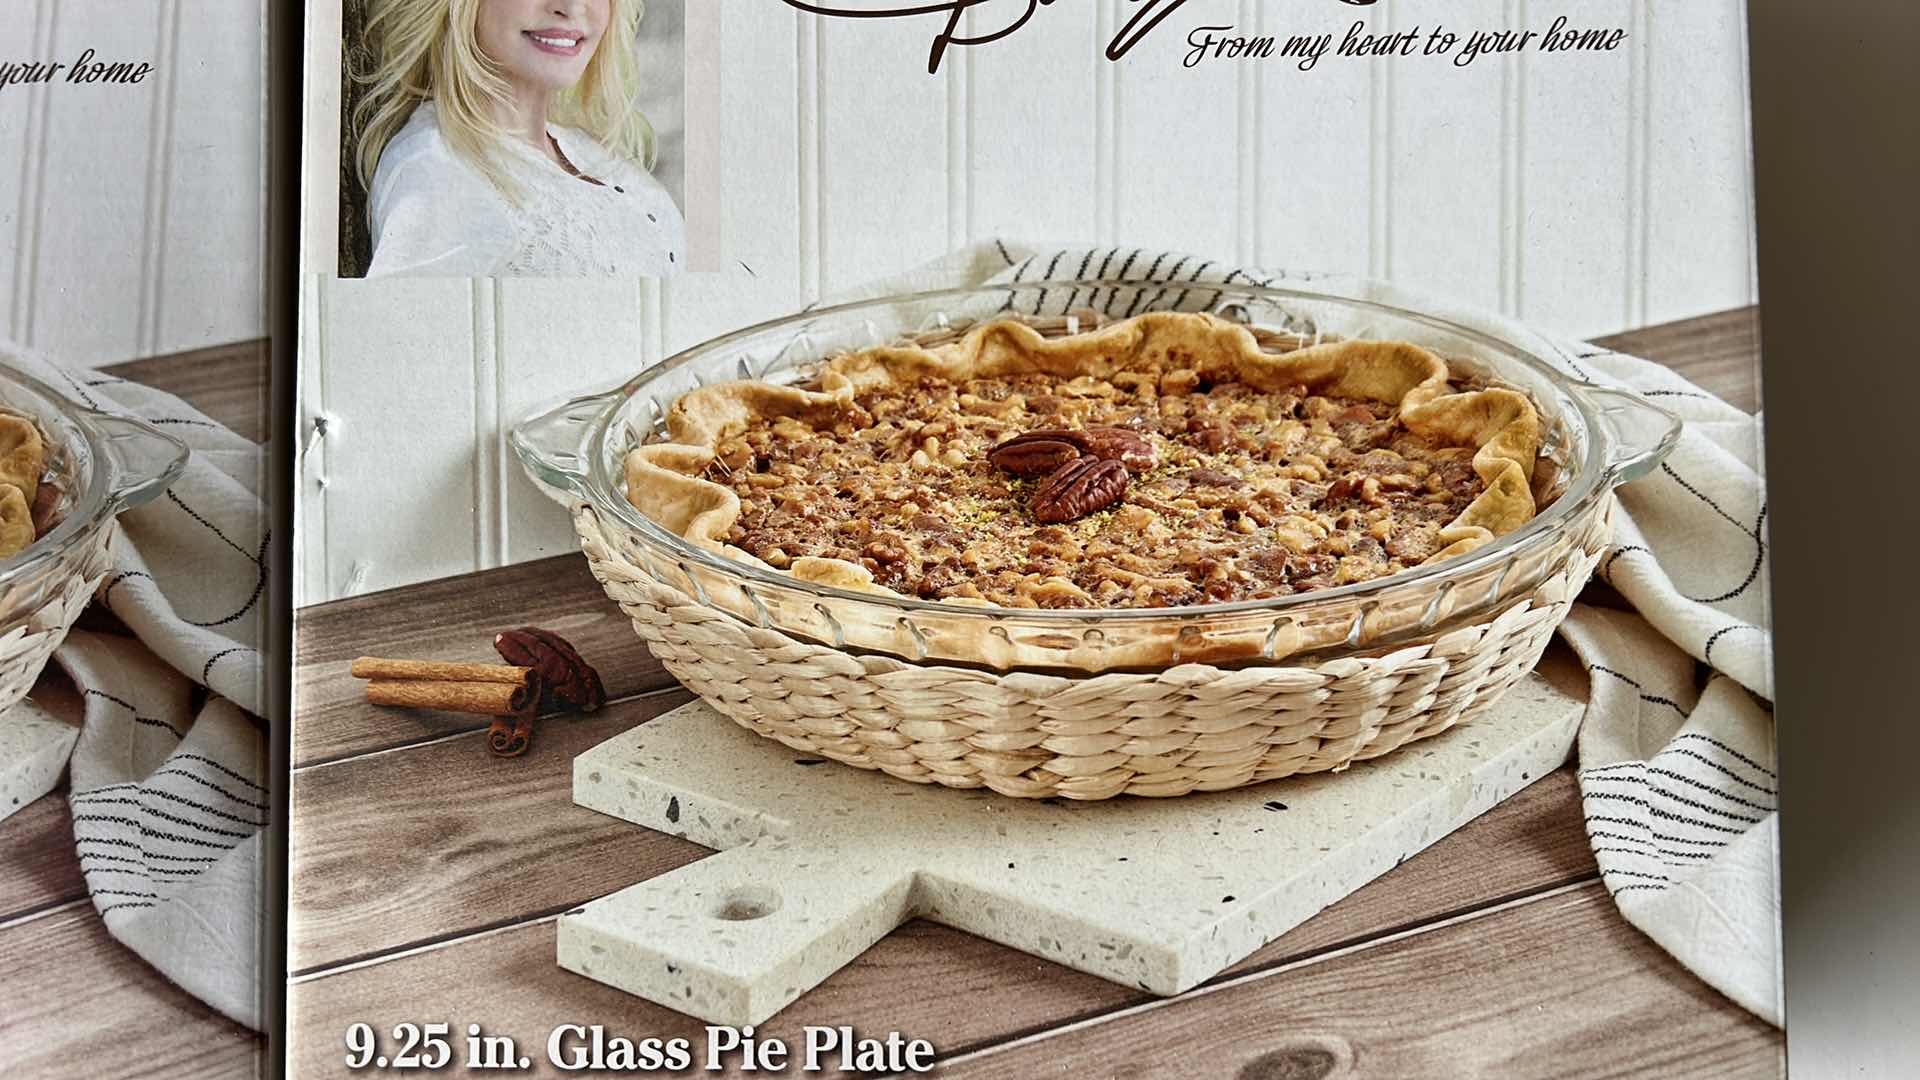 Photo 2 of 2 NEW DOLLY PARTON 9.25” GLASS PIE PLATE AND WICKER BASKET